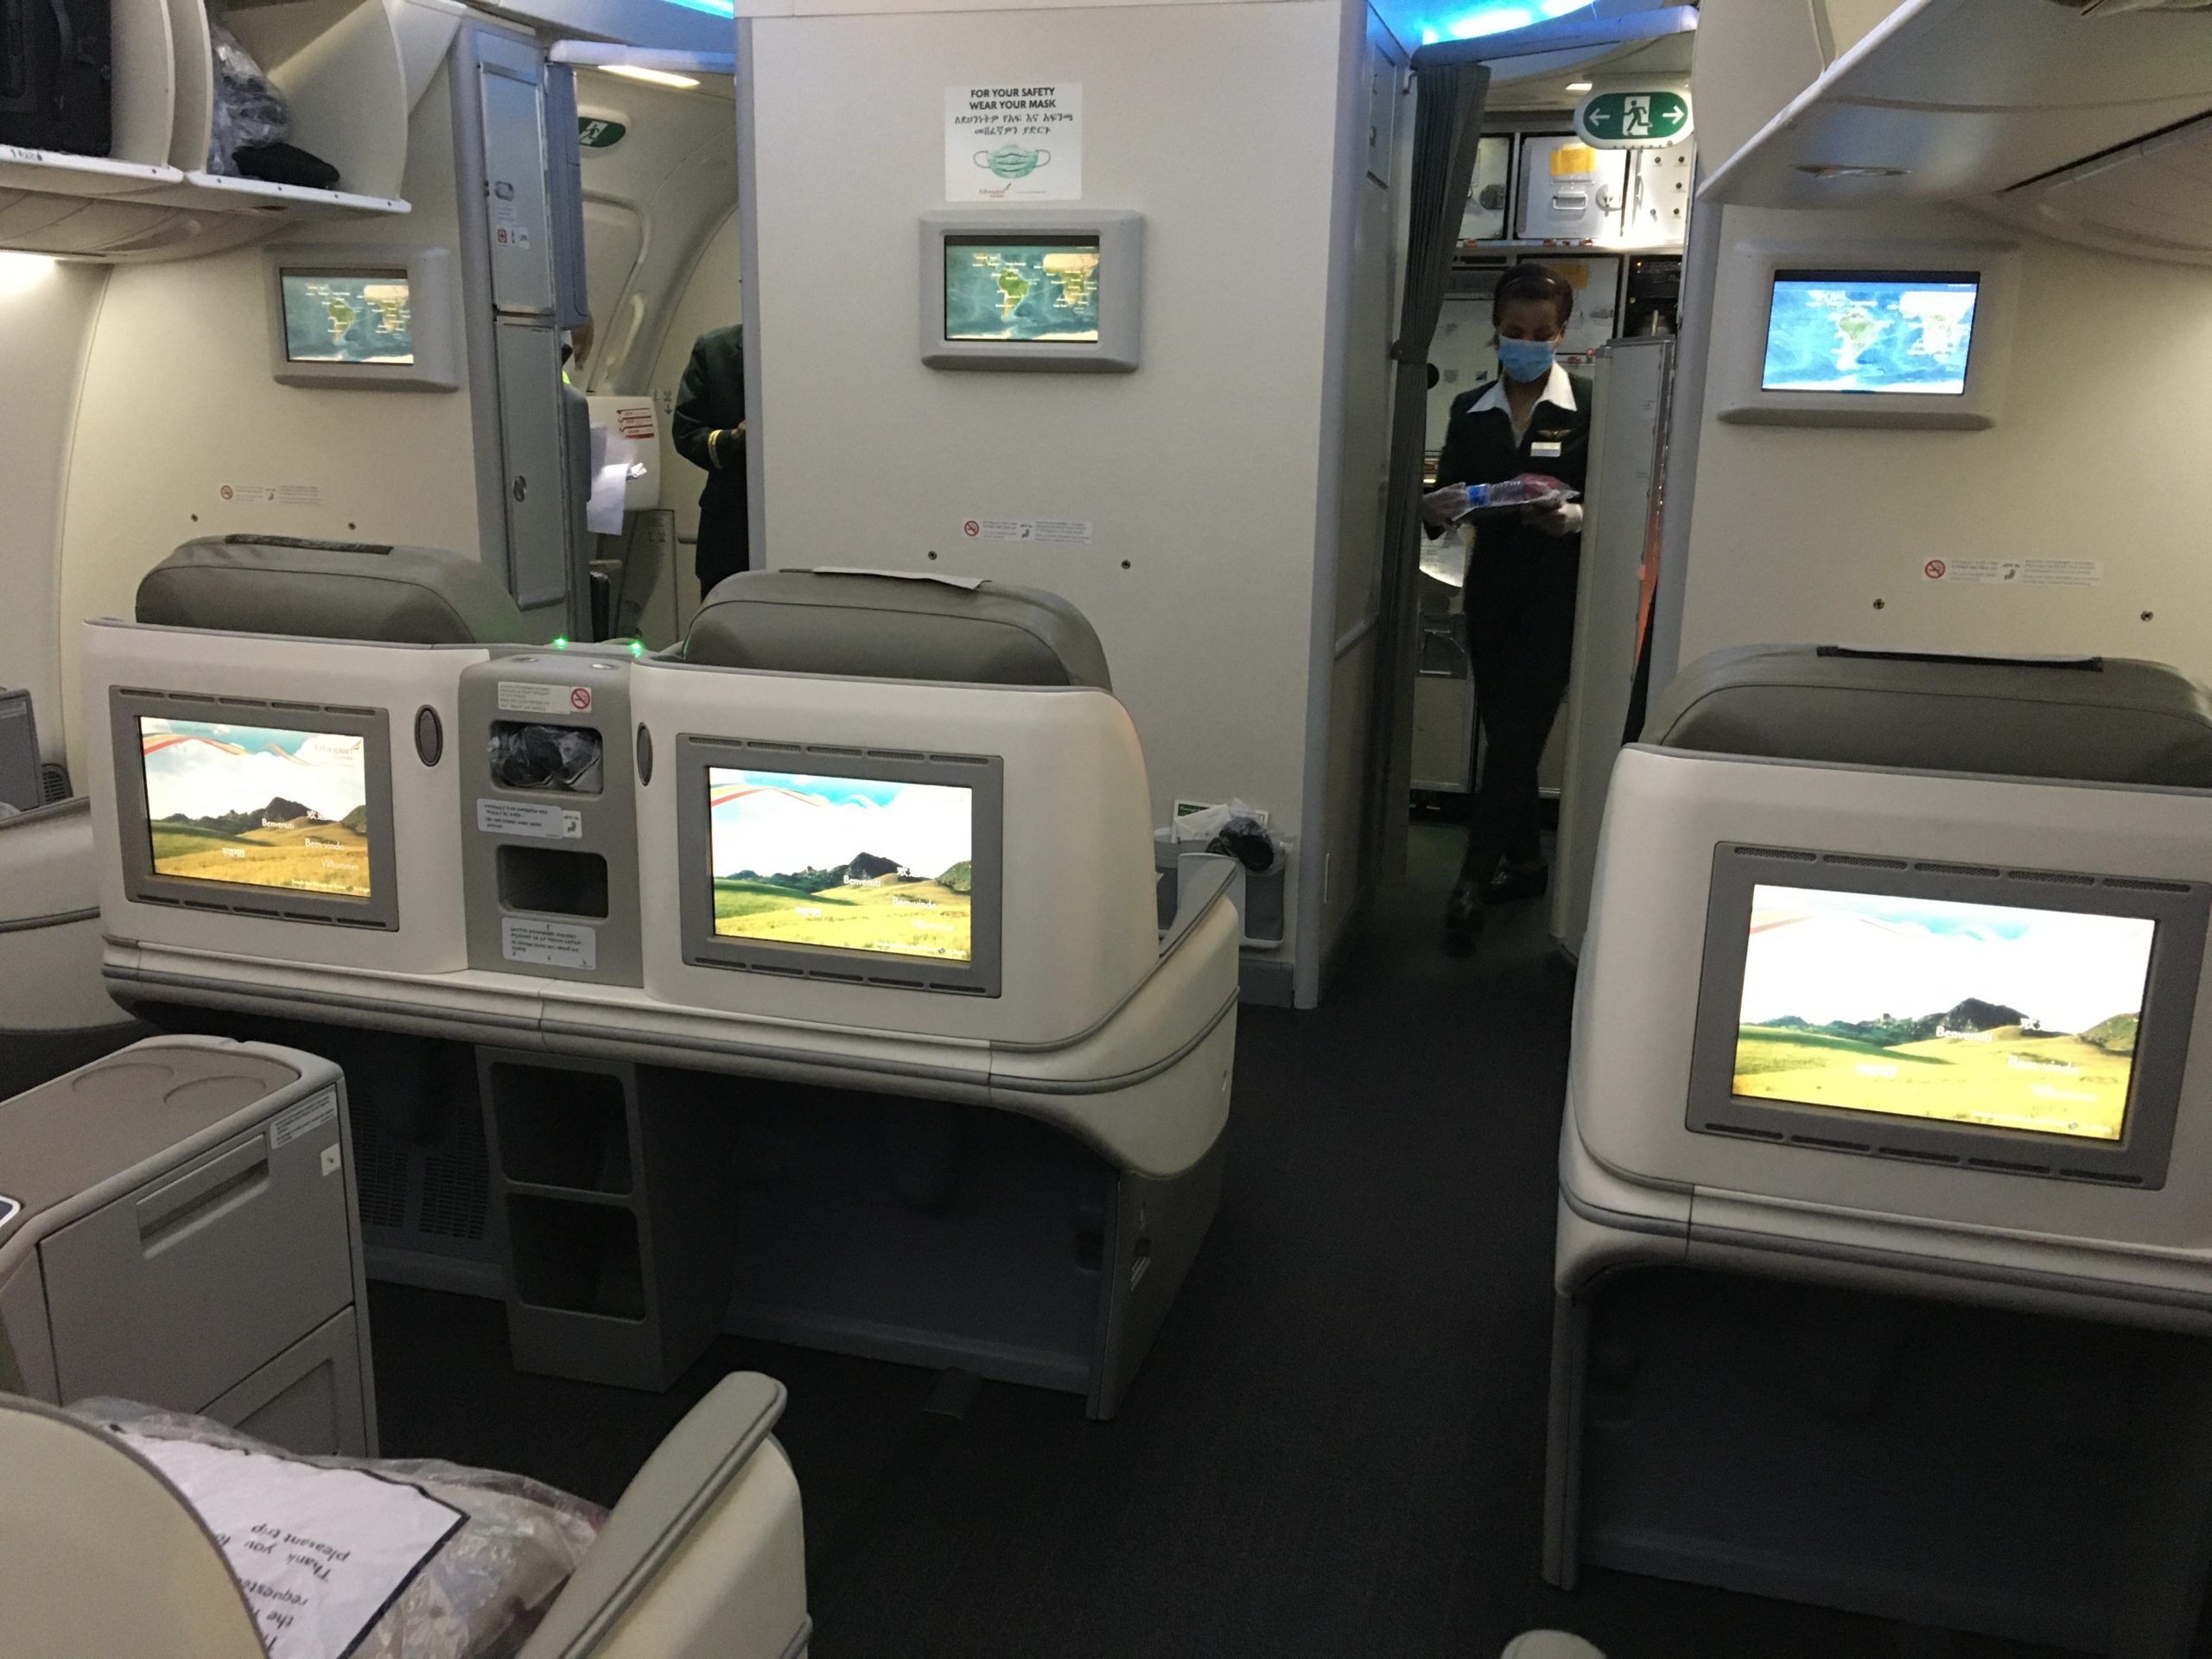 Ethiopian Airlines review - 787 business class, lounge & Skylight transit hotel